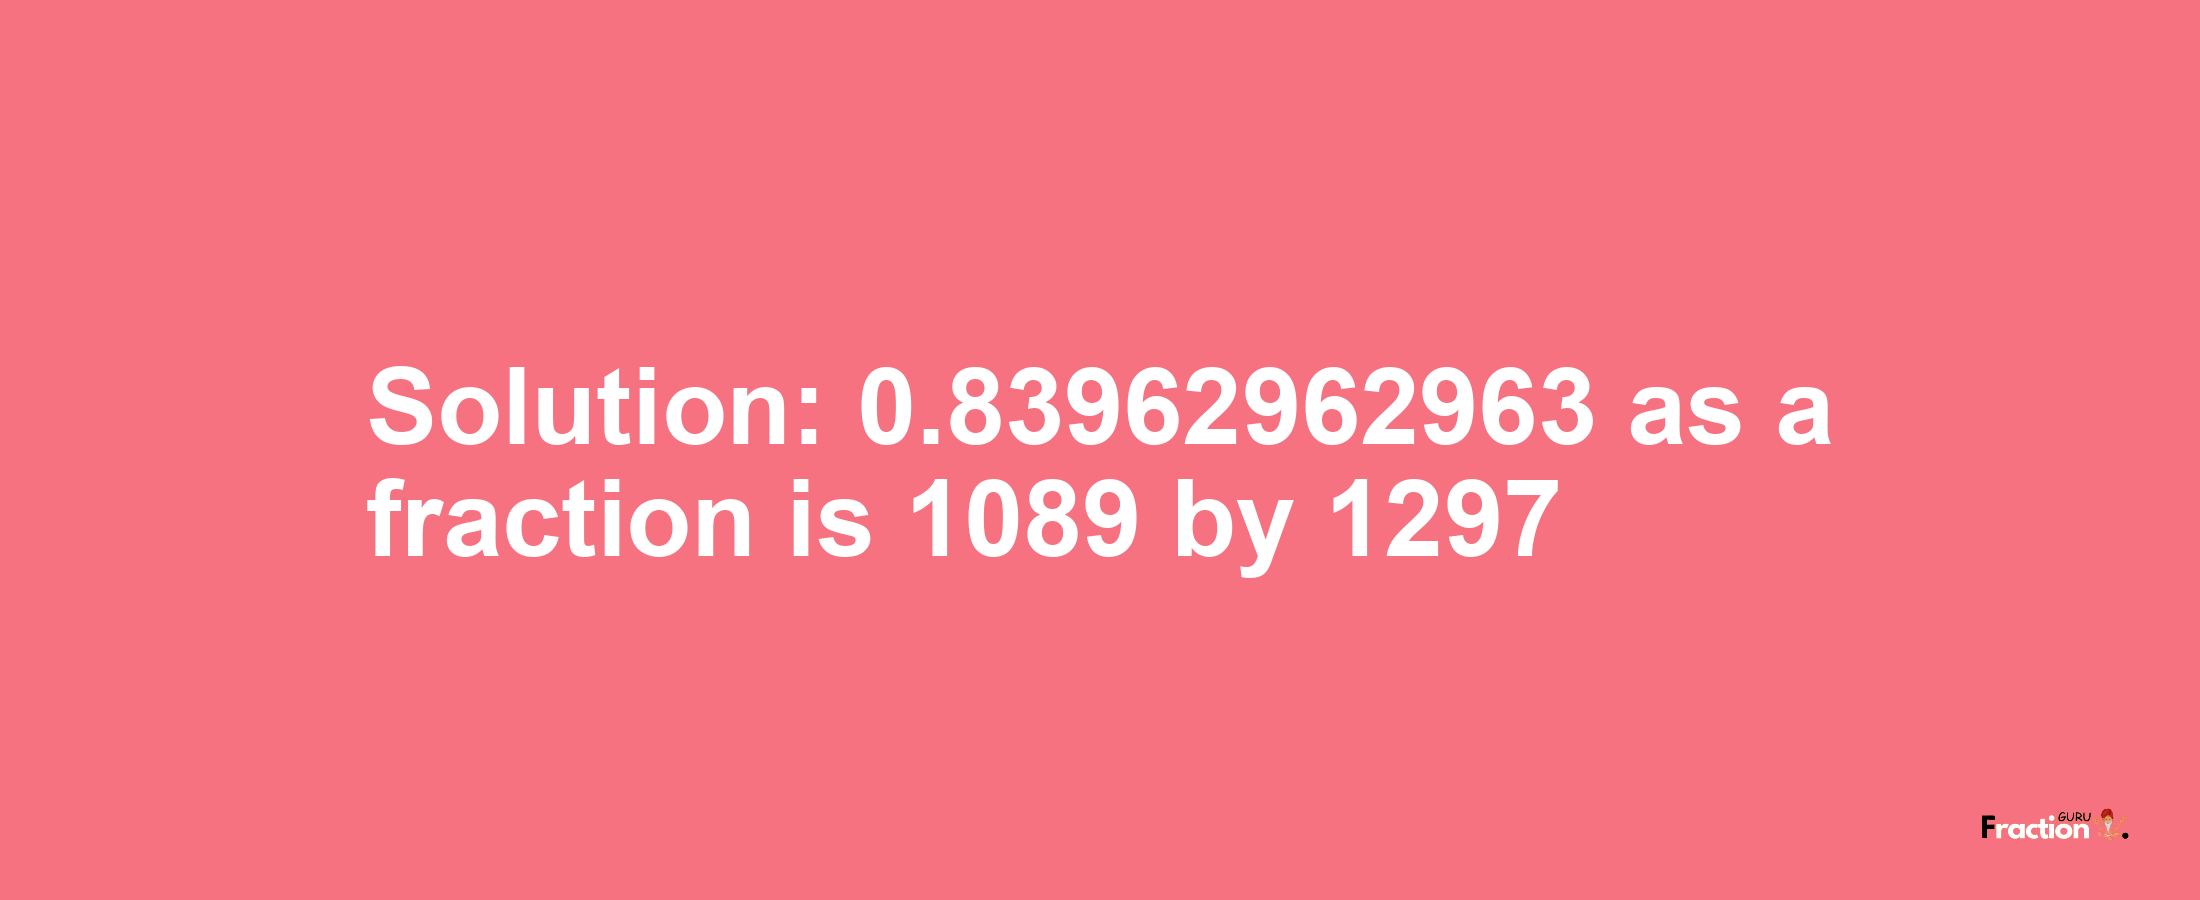 Solution:0.83962962963 as a fraction is 1089/1297